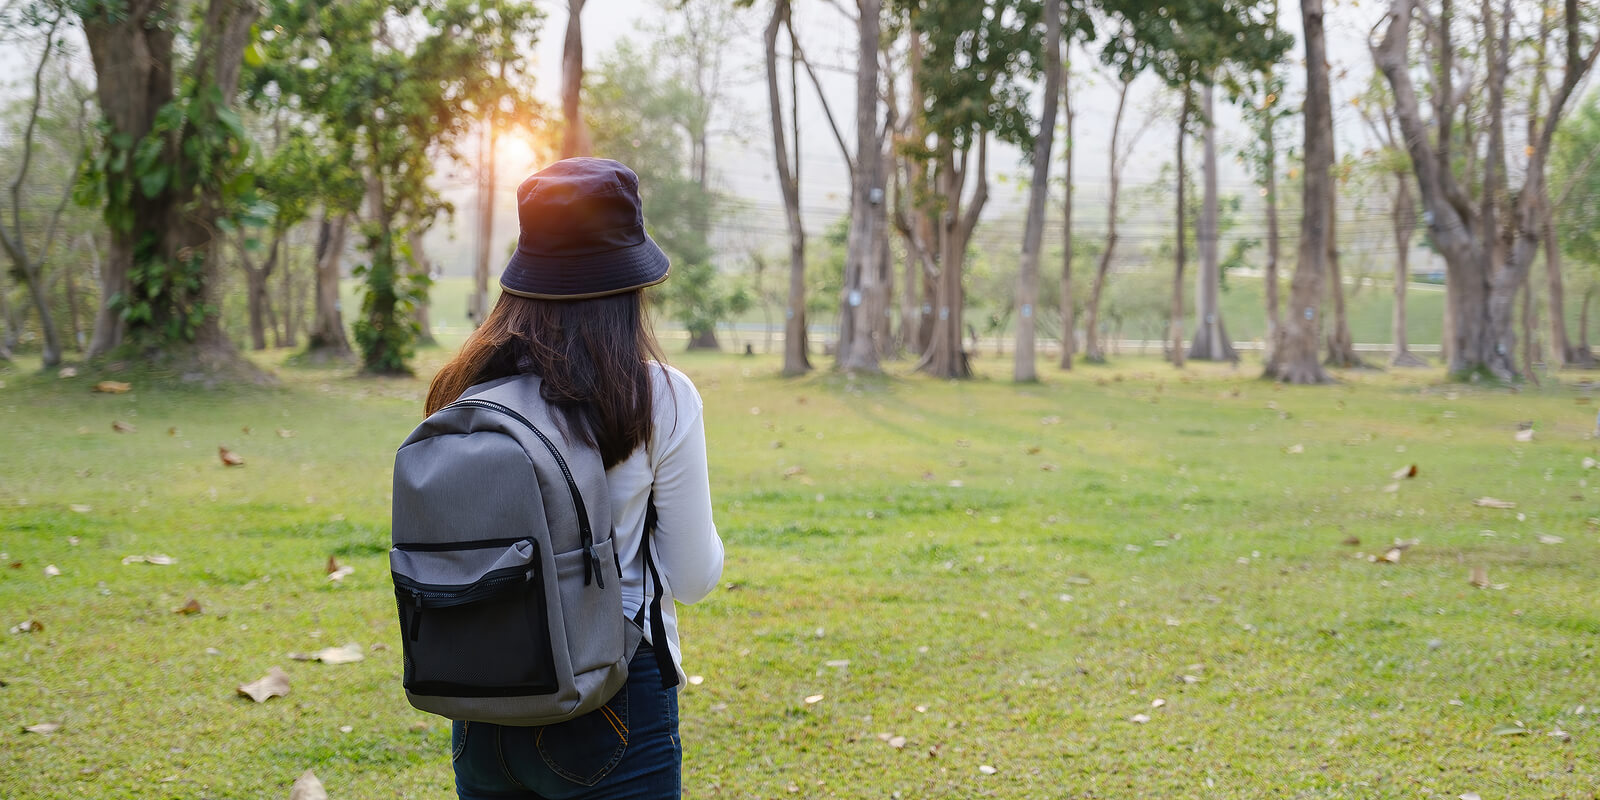 A teen with a bucket hat and a backpack on stands in a grassy area near trees. Want to learn how CBT works for teens with autism in Arlington, MA? Speak with a teen therapist in MA to see how therapy for teens can help them.